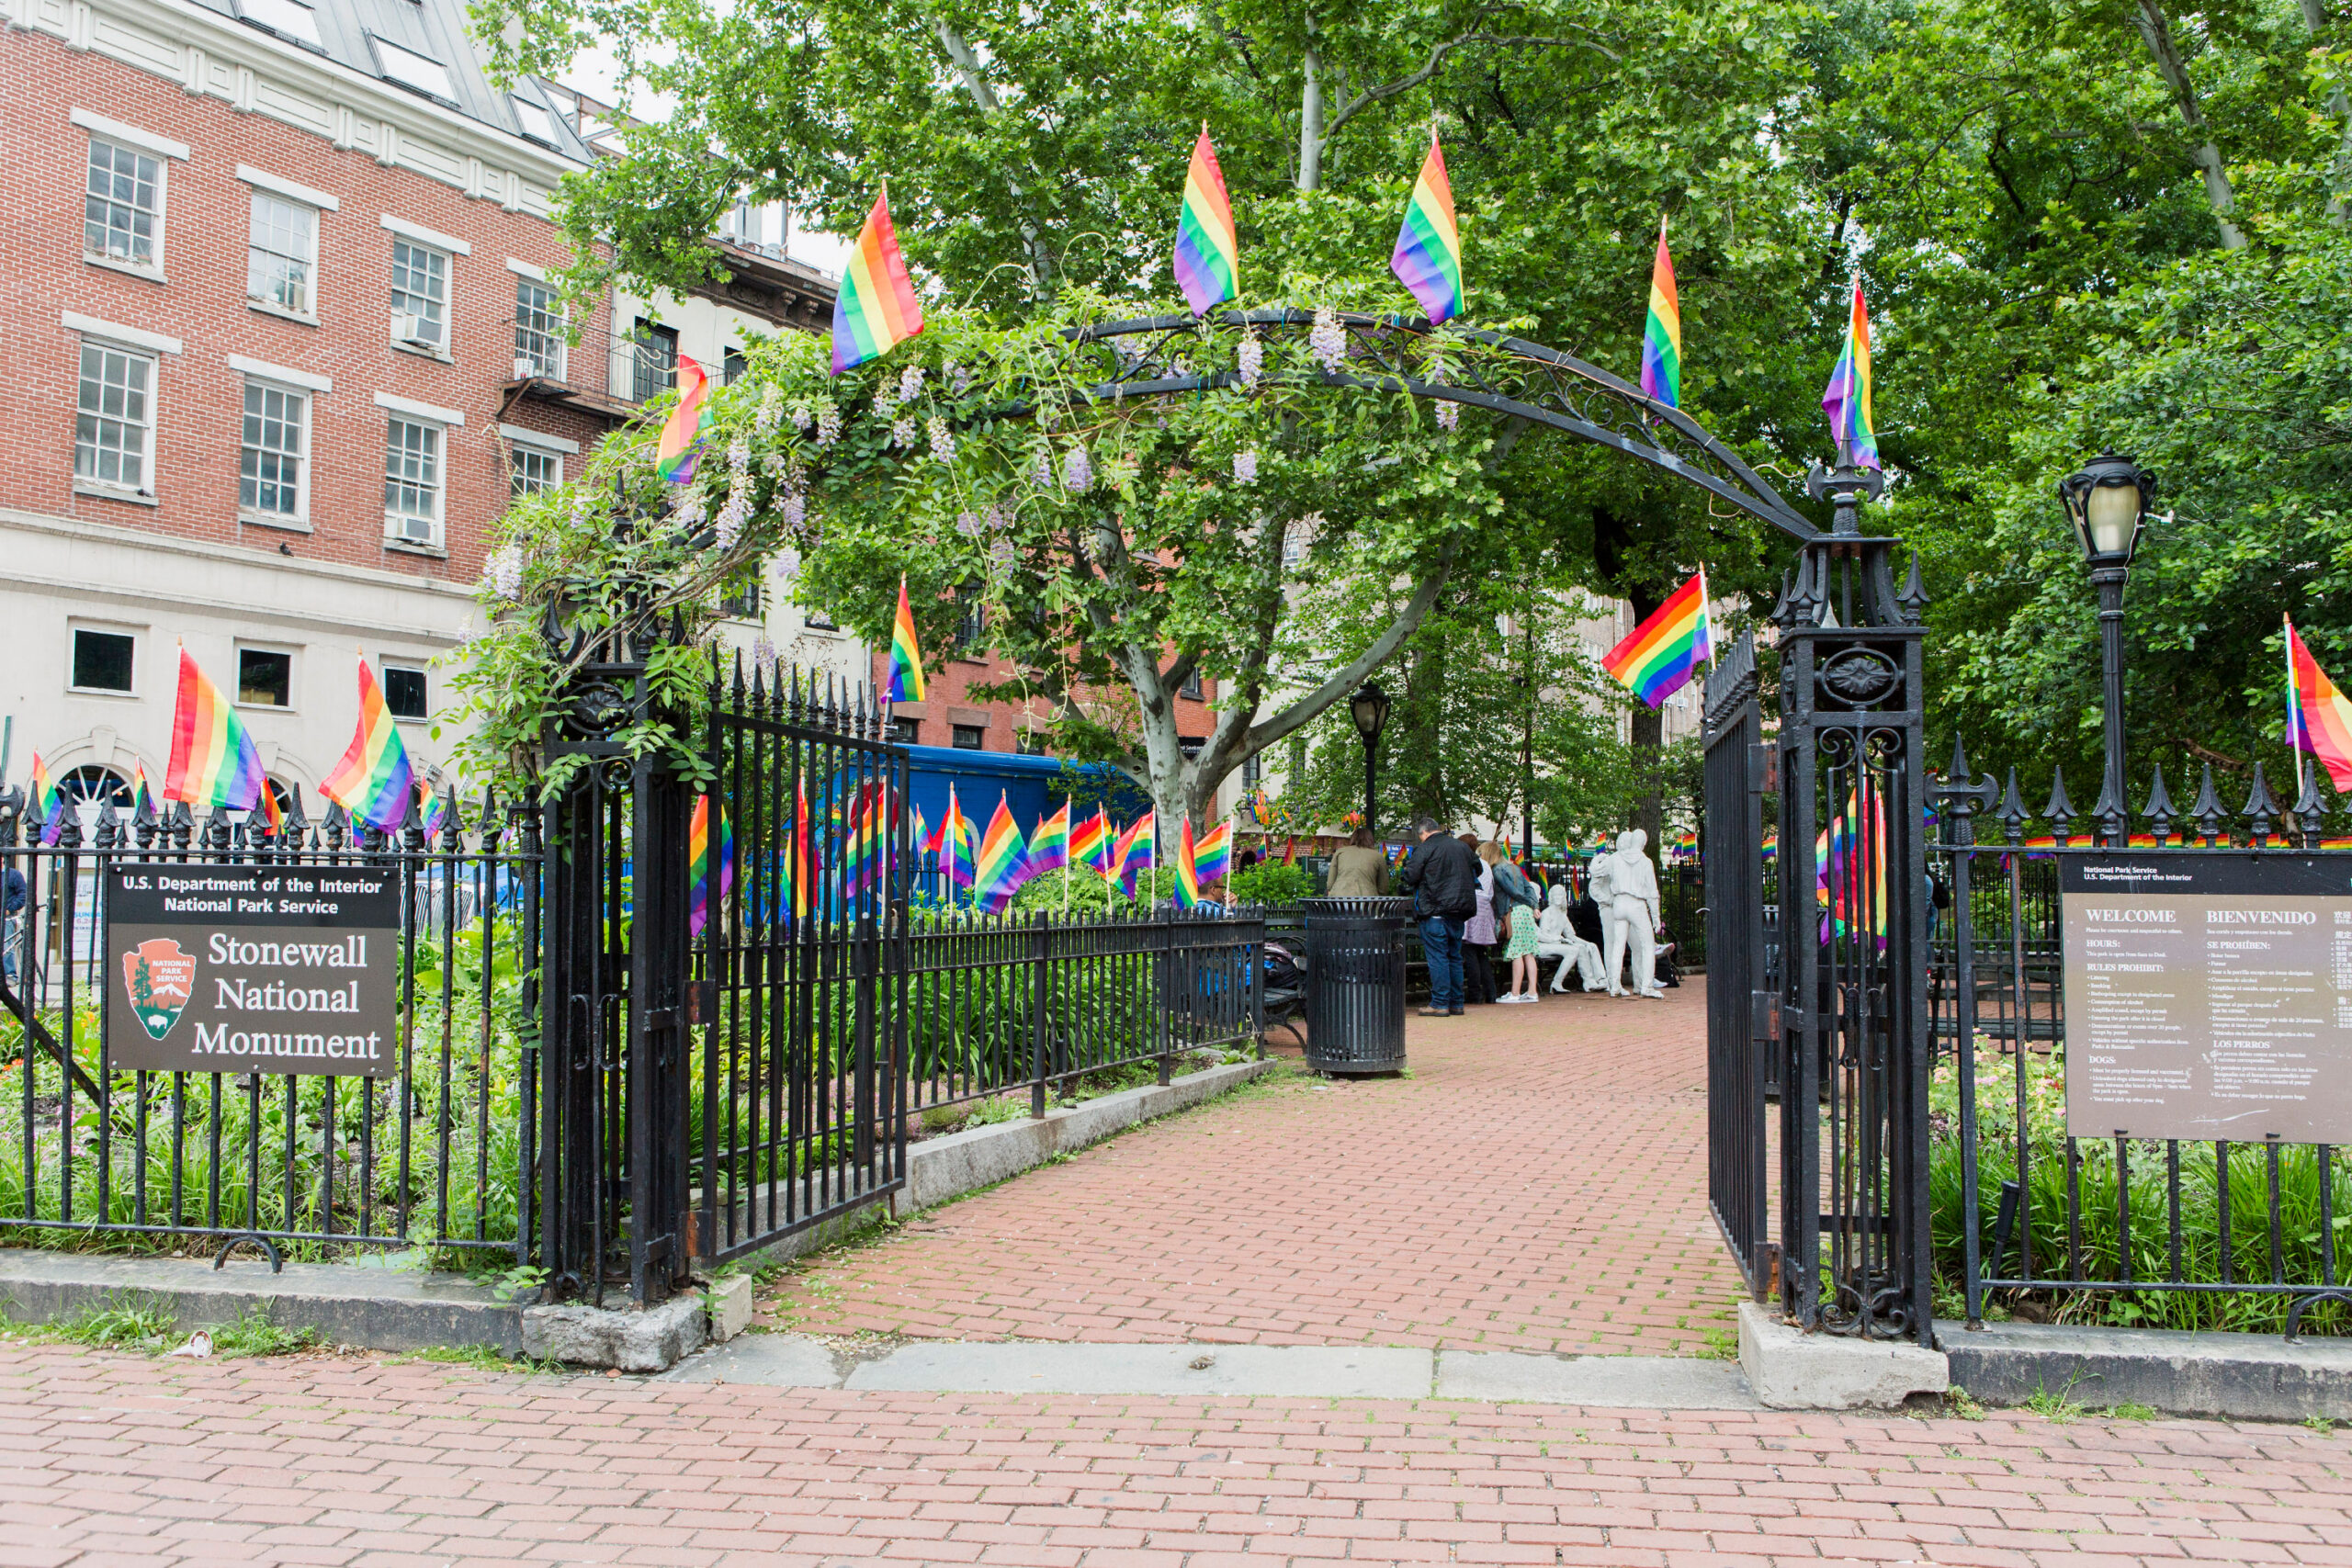 GREENWICH VILLAGE AND THE LGBTQ COMMUNITY TOUR